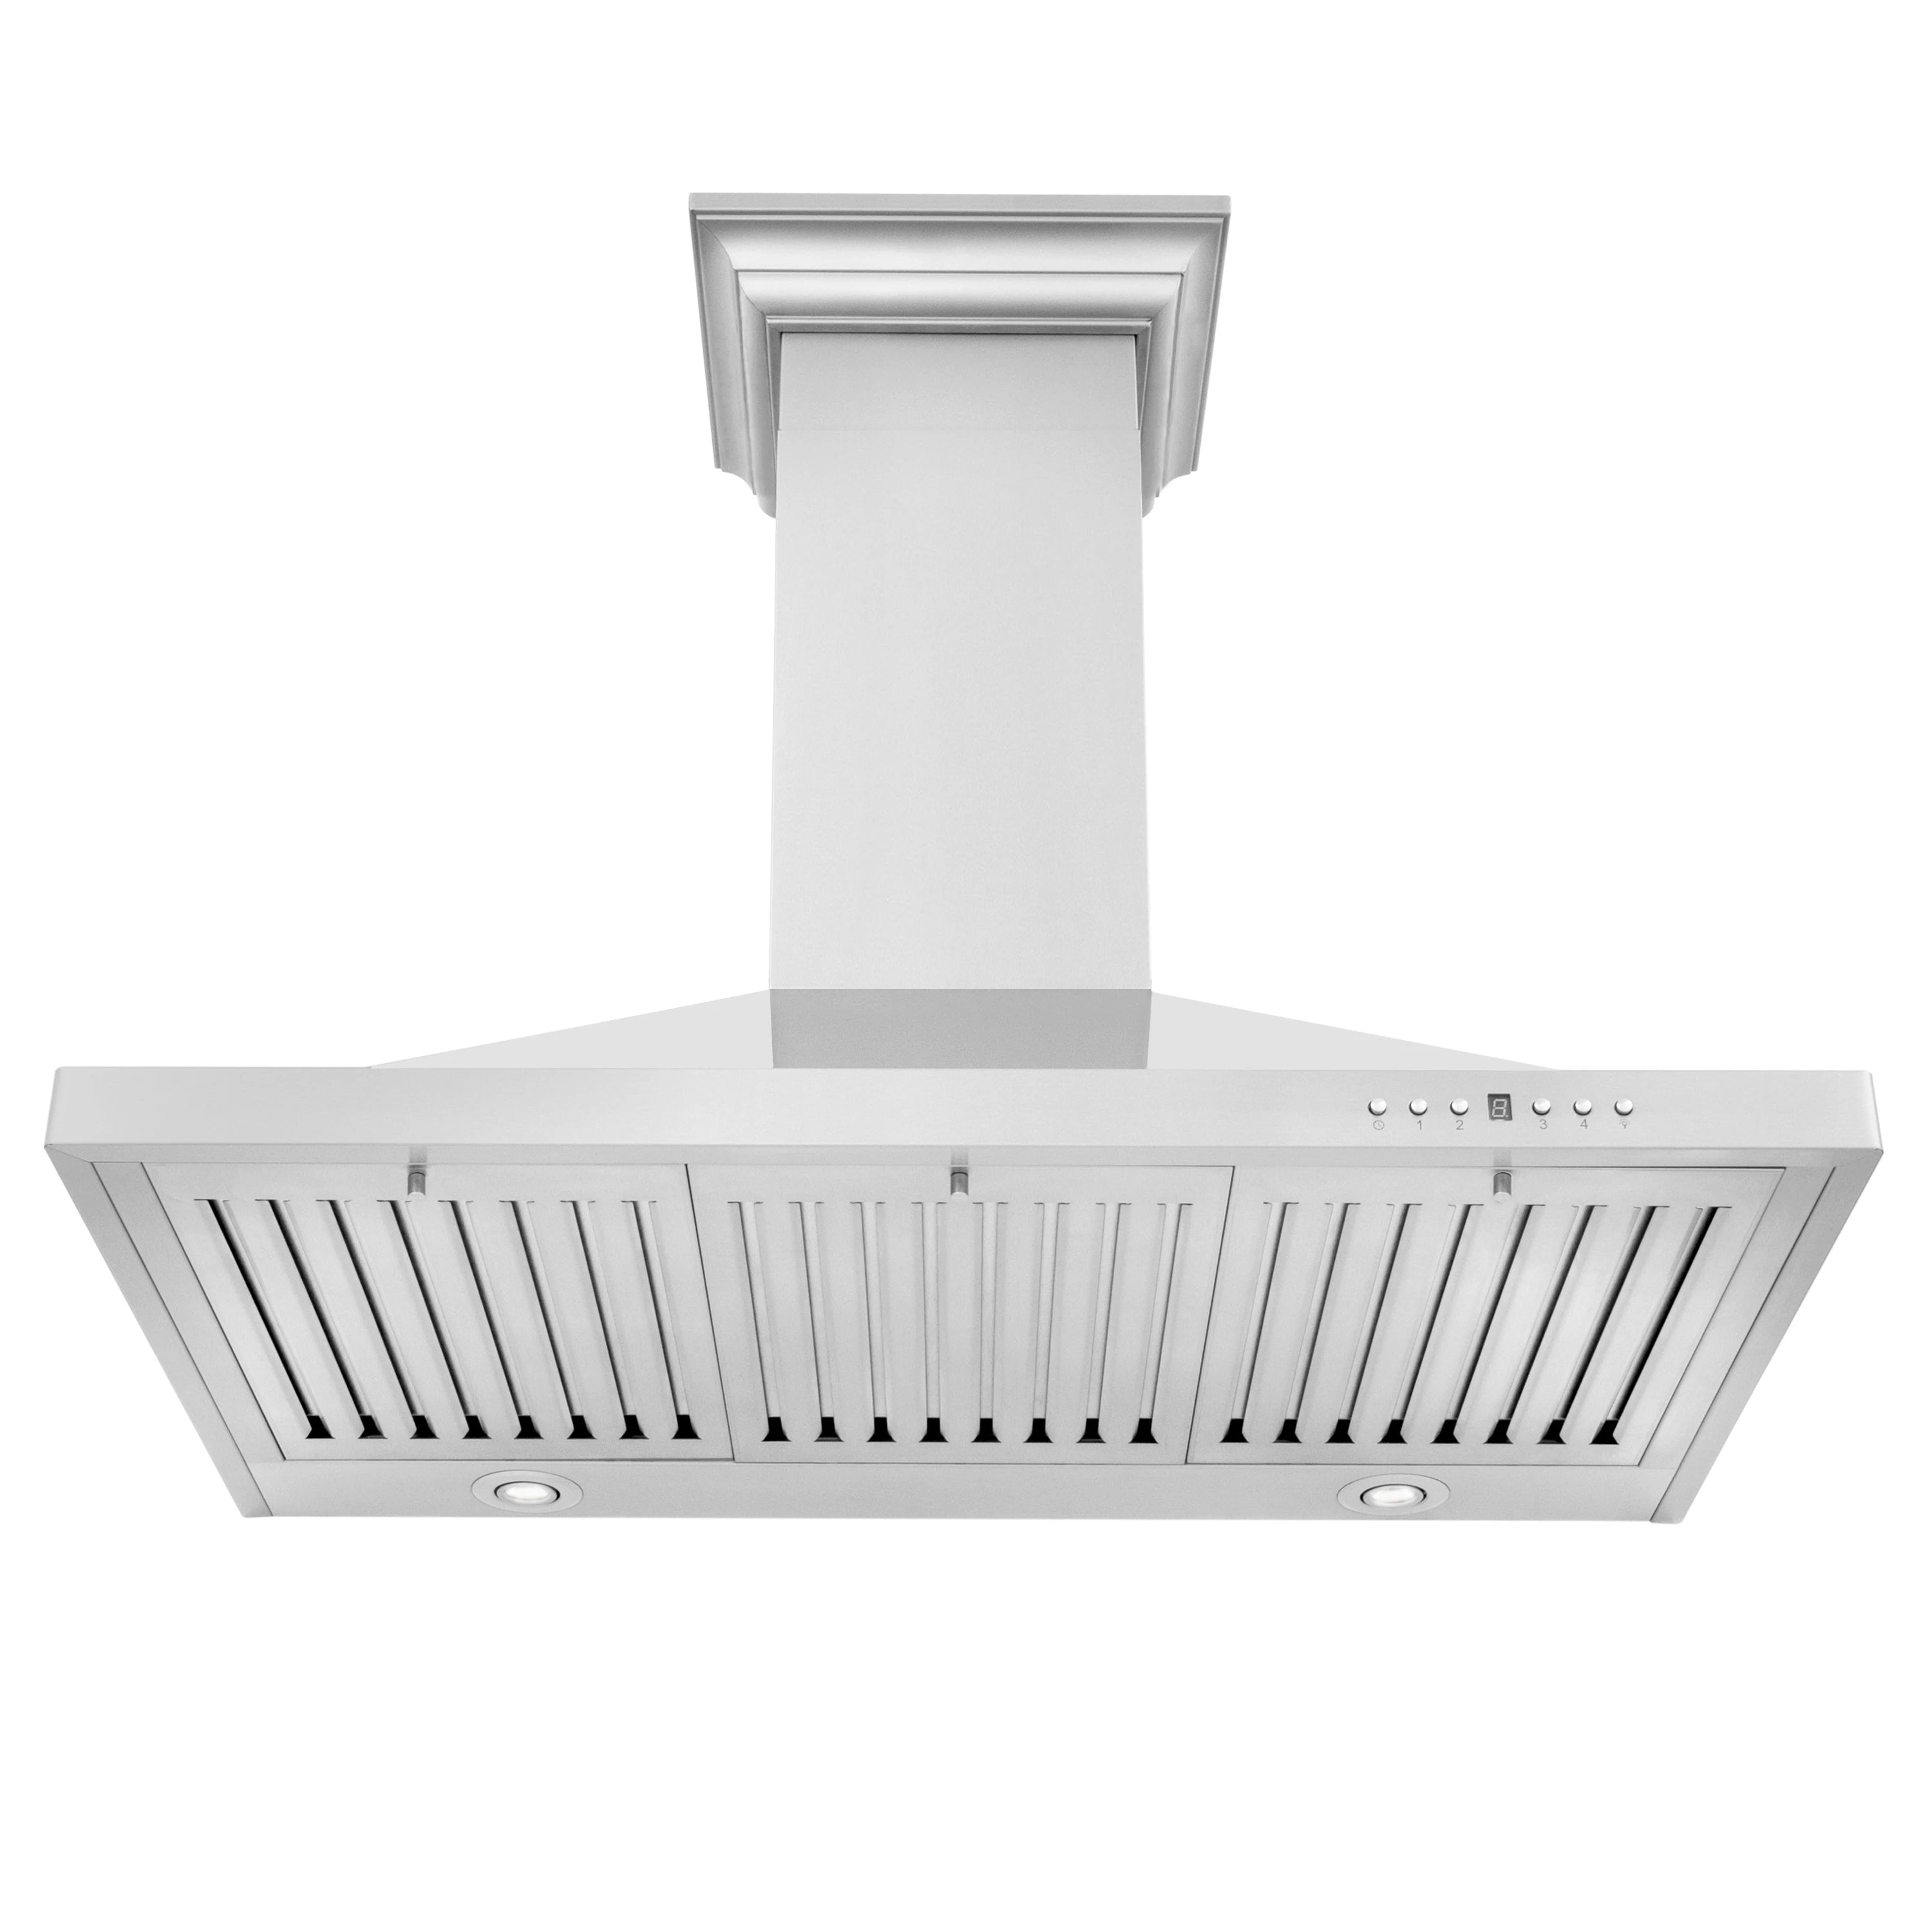 ZLINE Convertible Vent Wall Mount Range Hood in Stainless Steel with C